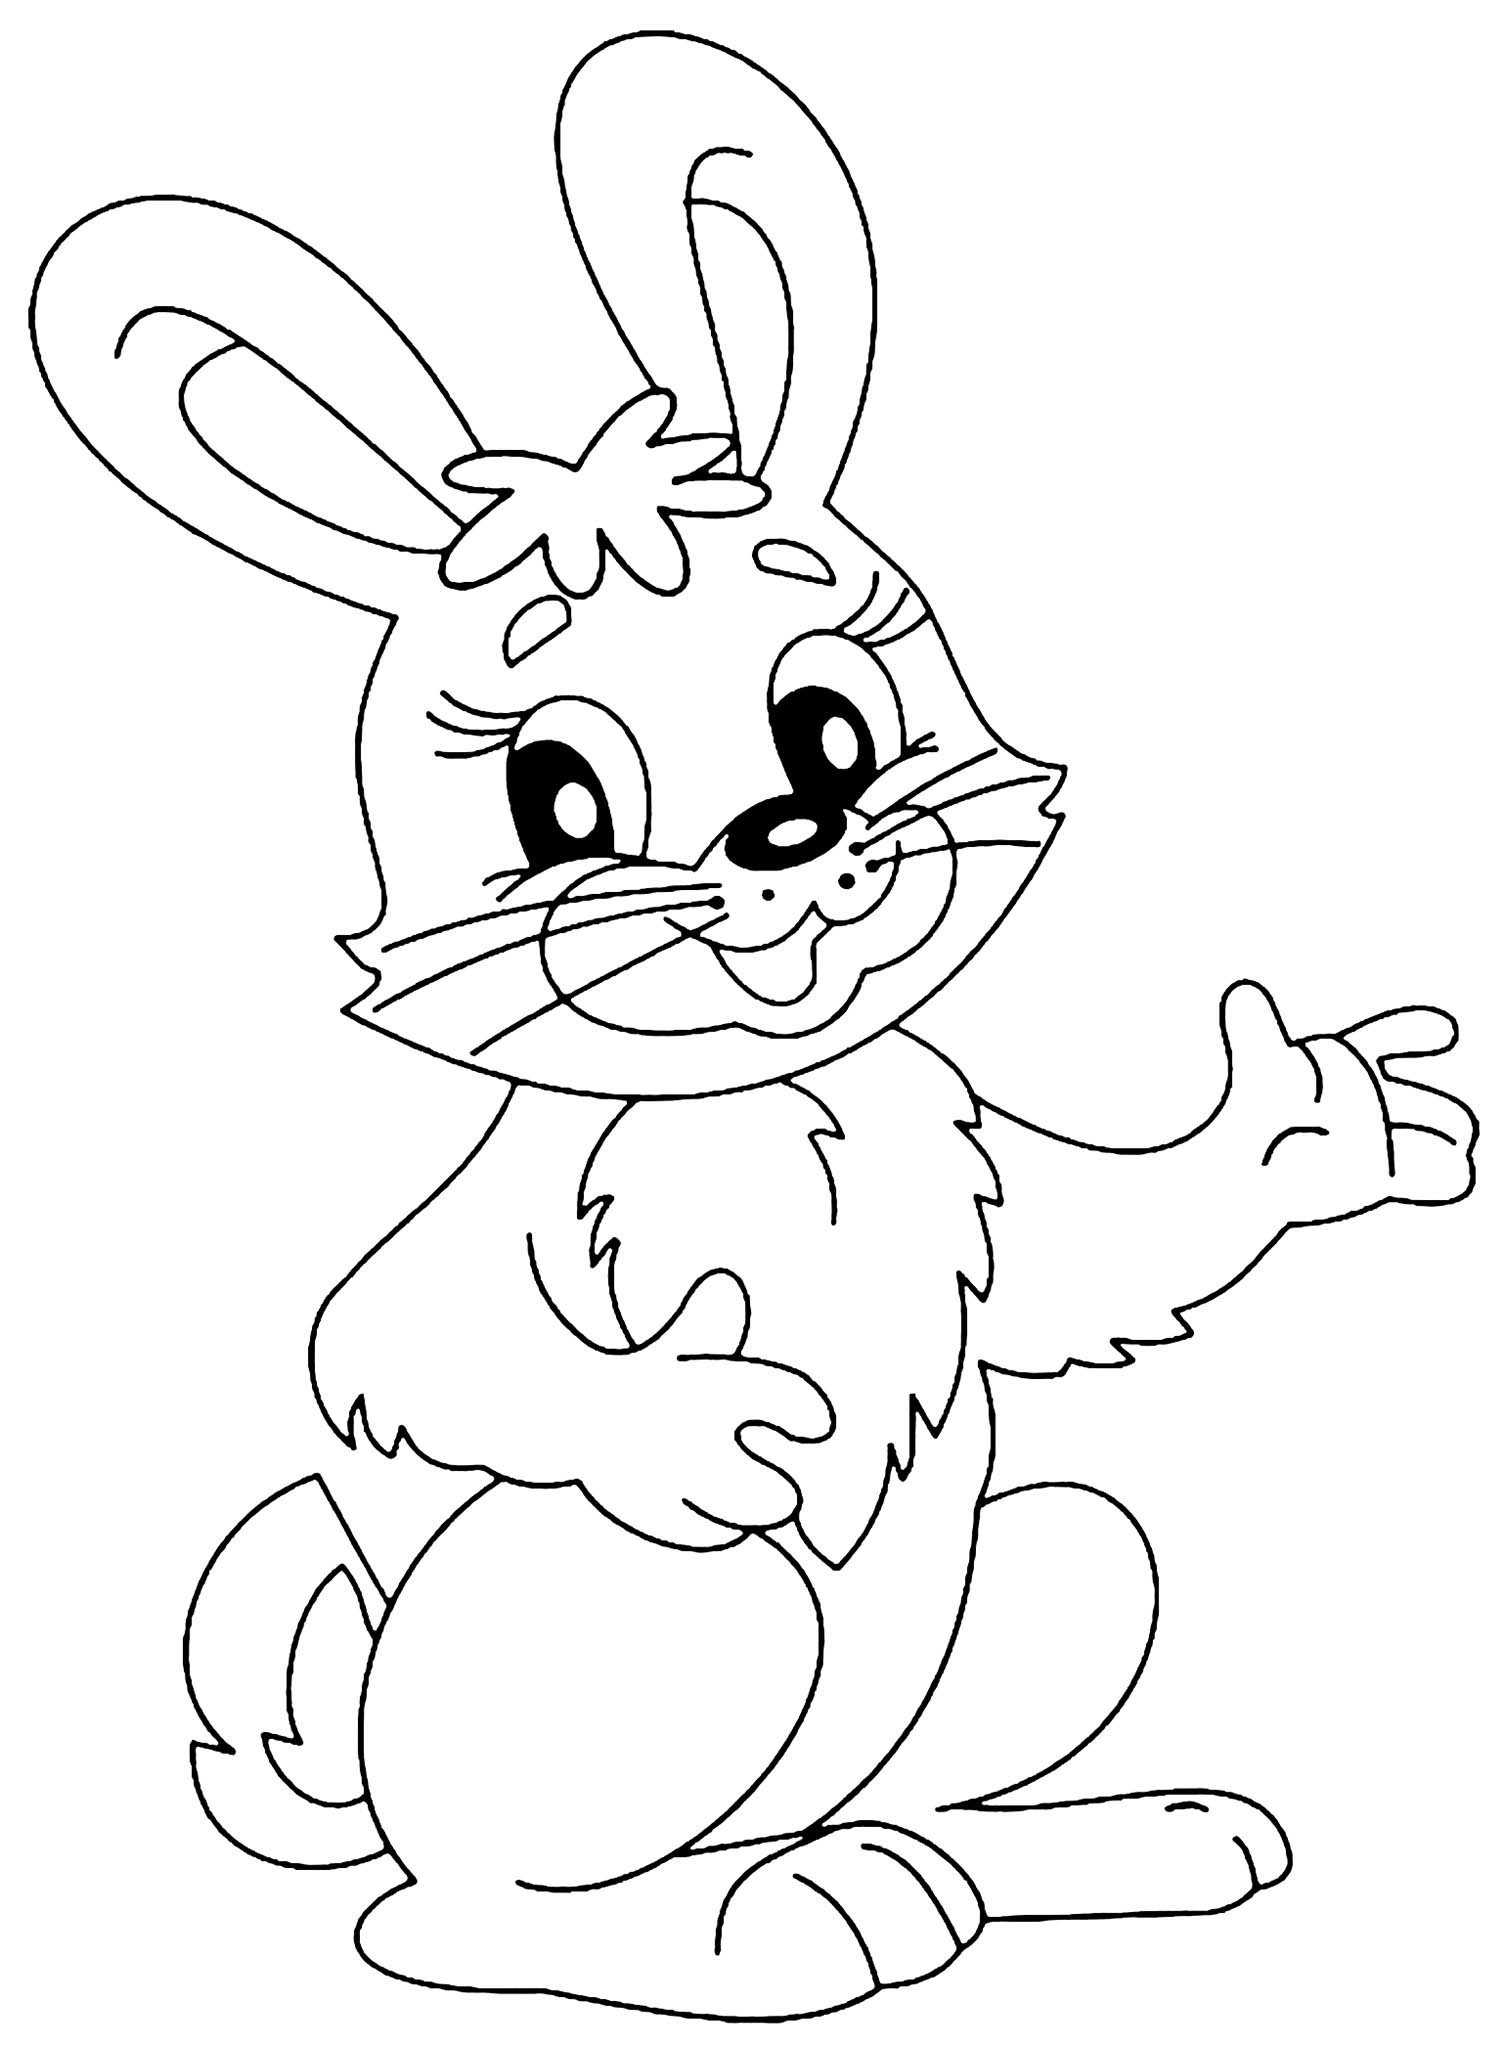 image-of-rabbit-to-print-and-color-rabbits-bunnies-kids-coloring-pages